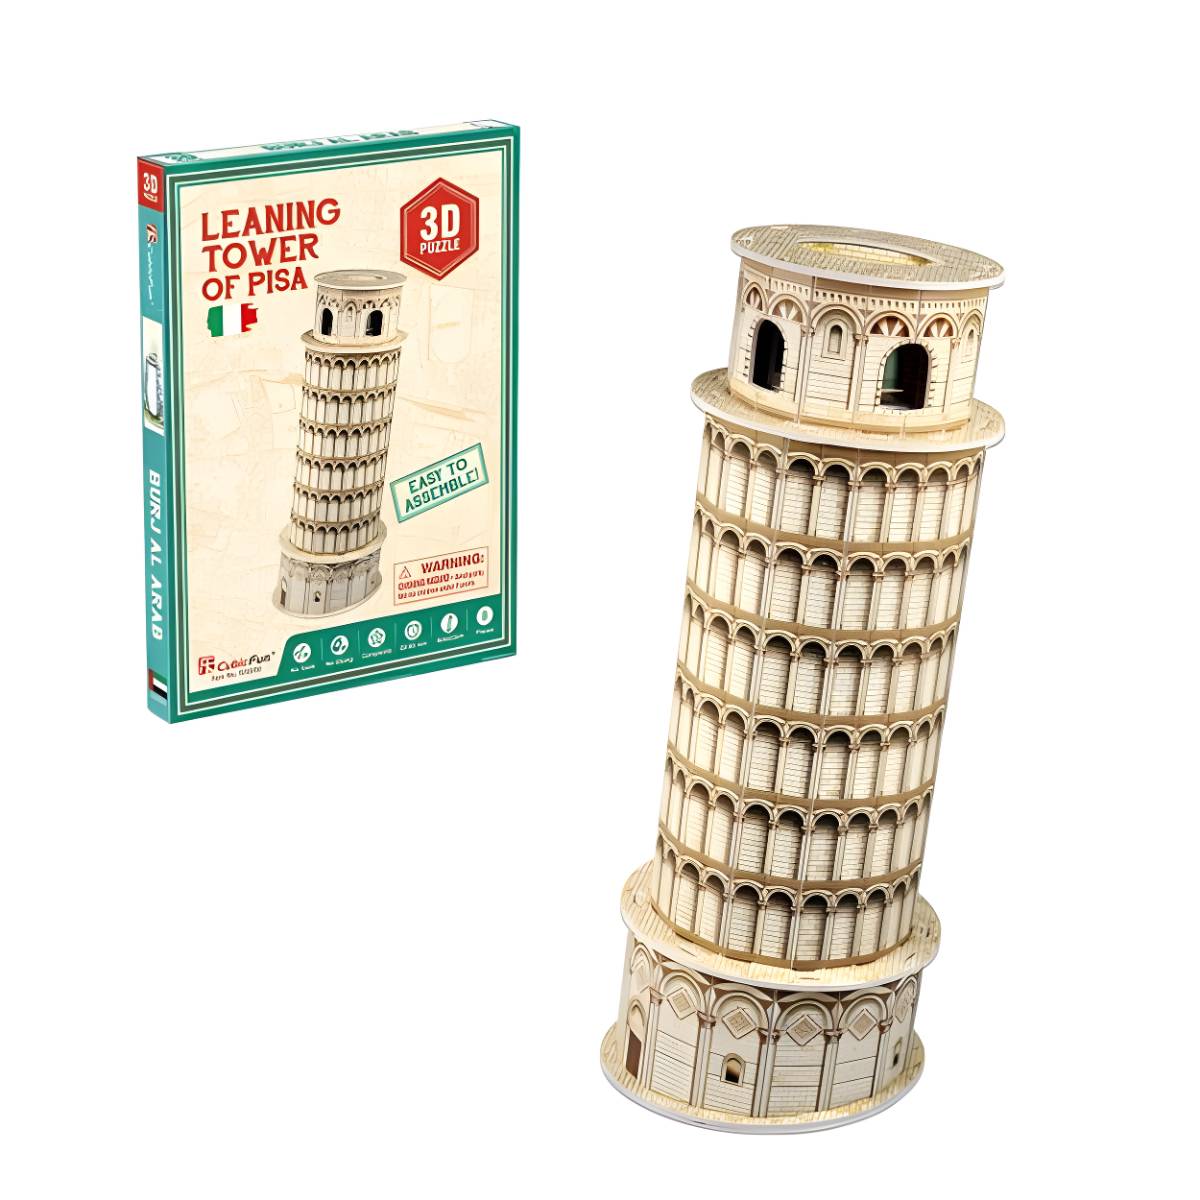 3D Puzzle - Leaning Tower of Pisa